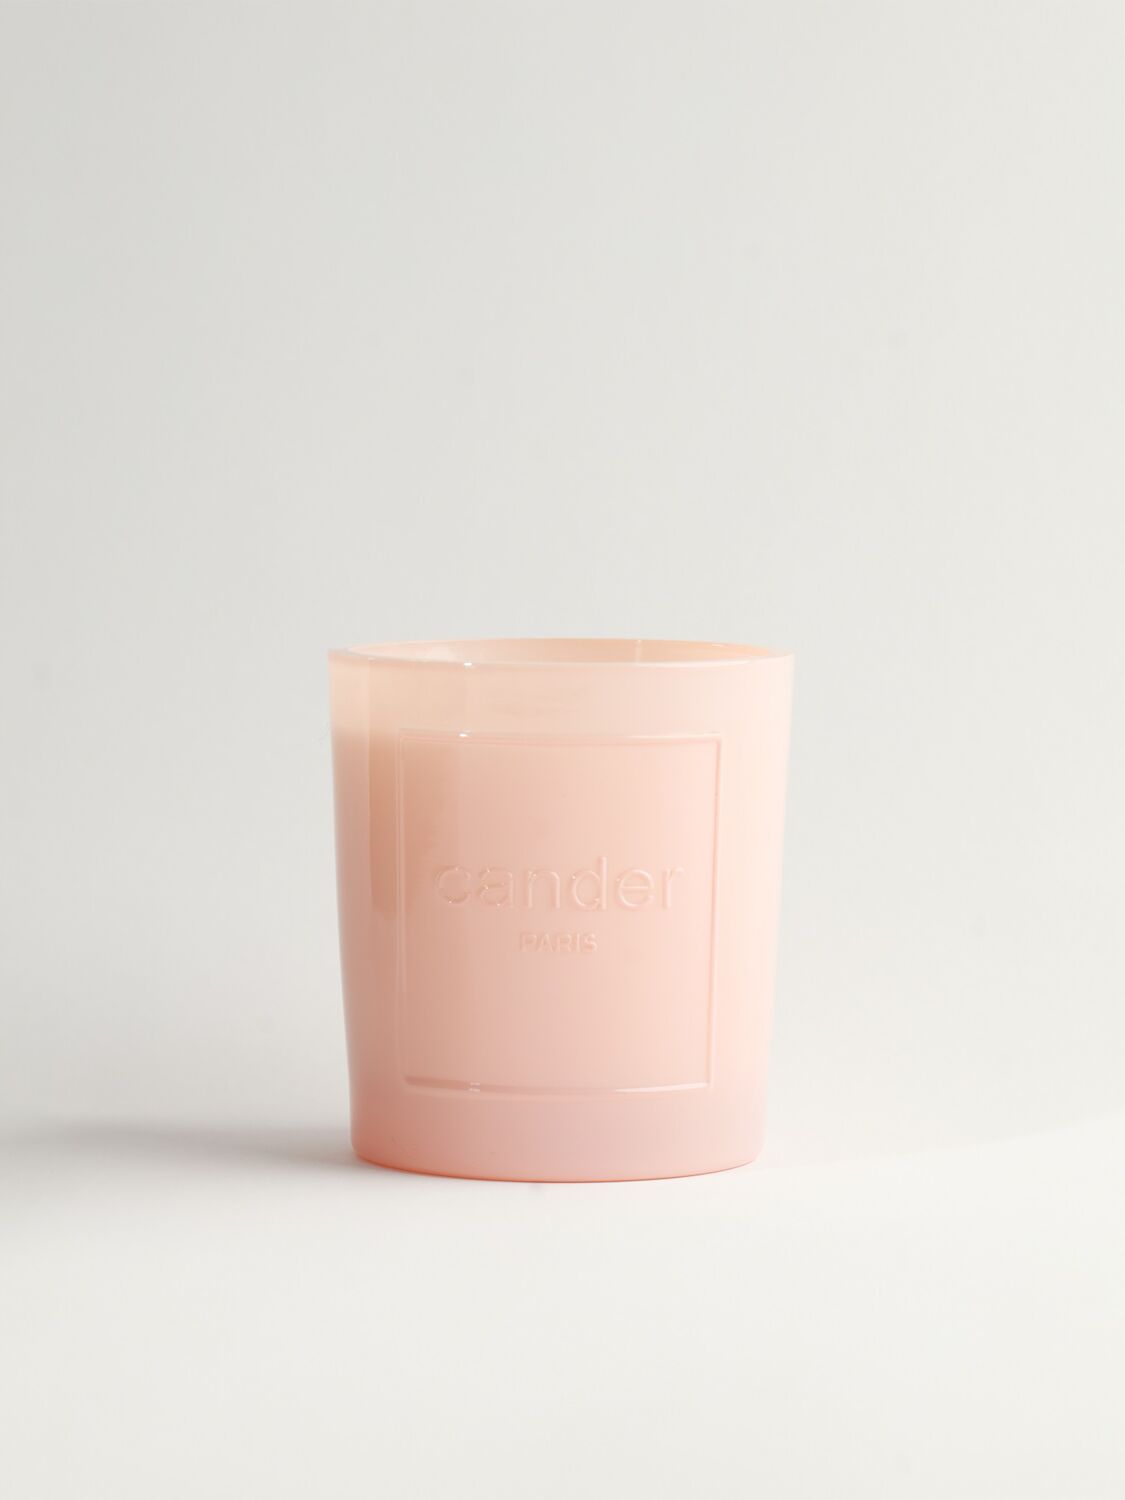 Shop Cander Paris Rose Candle In Pink